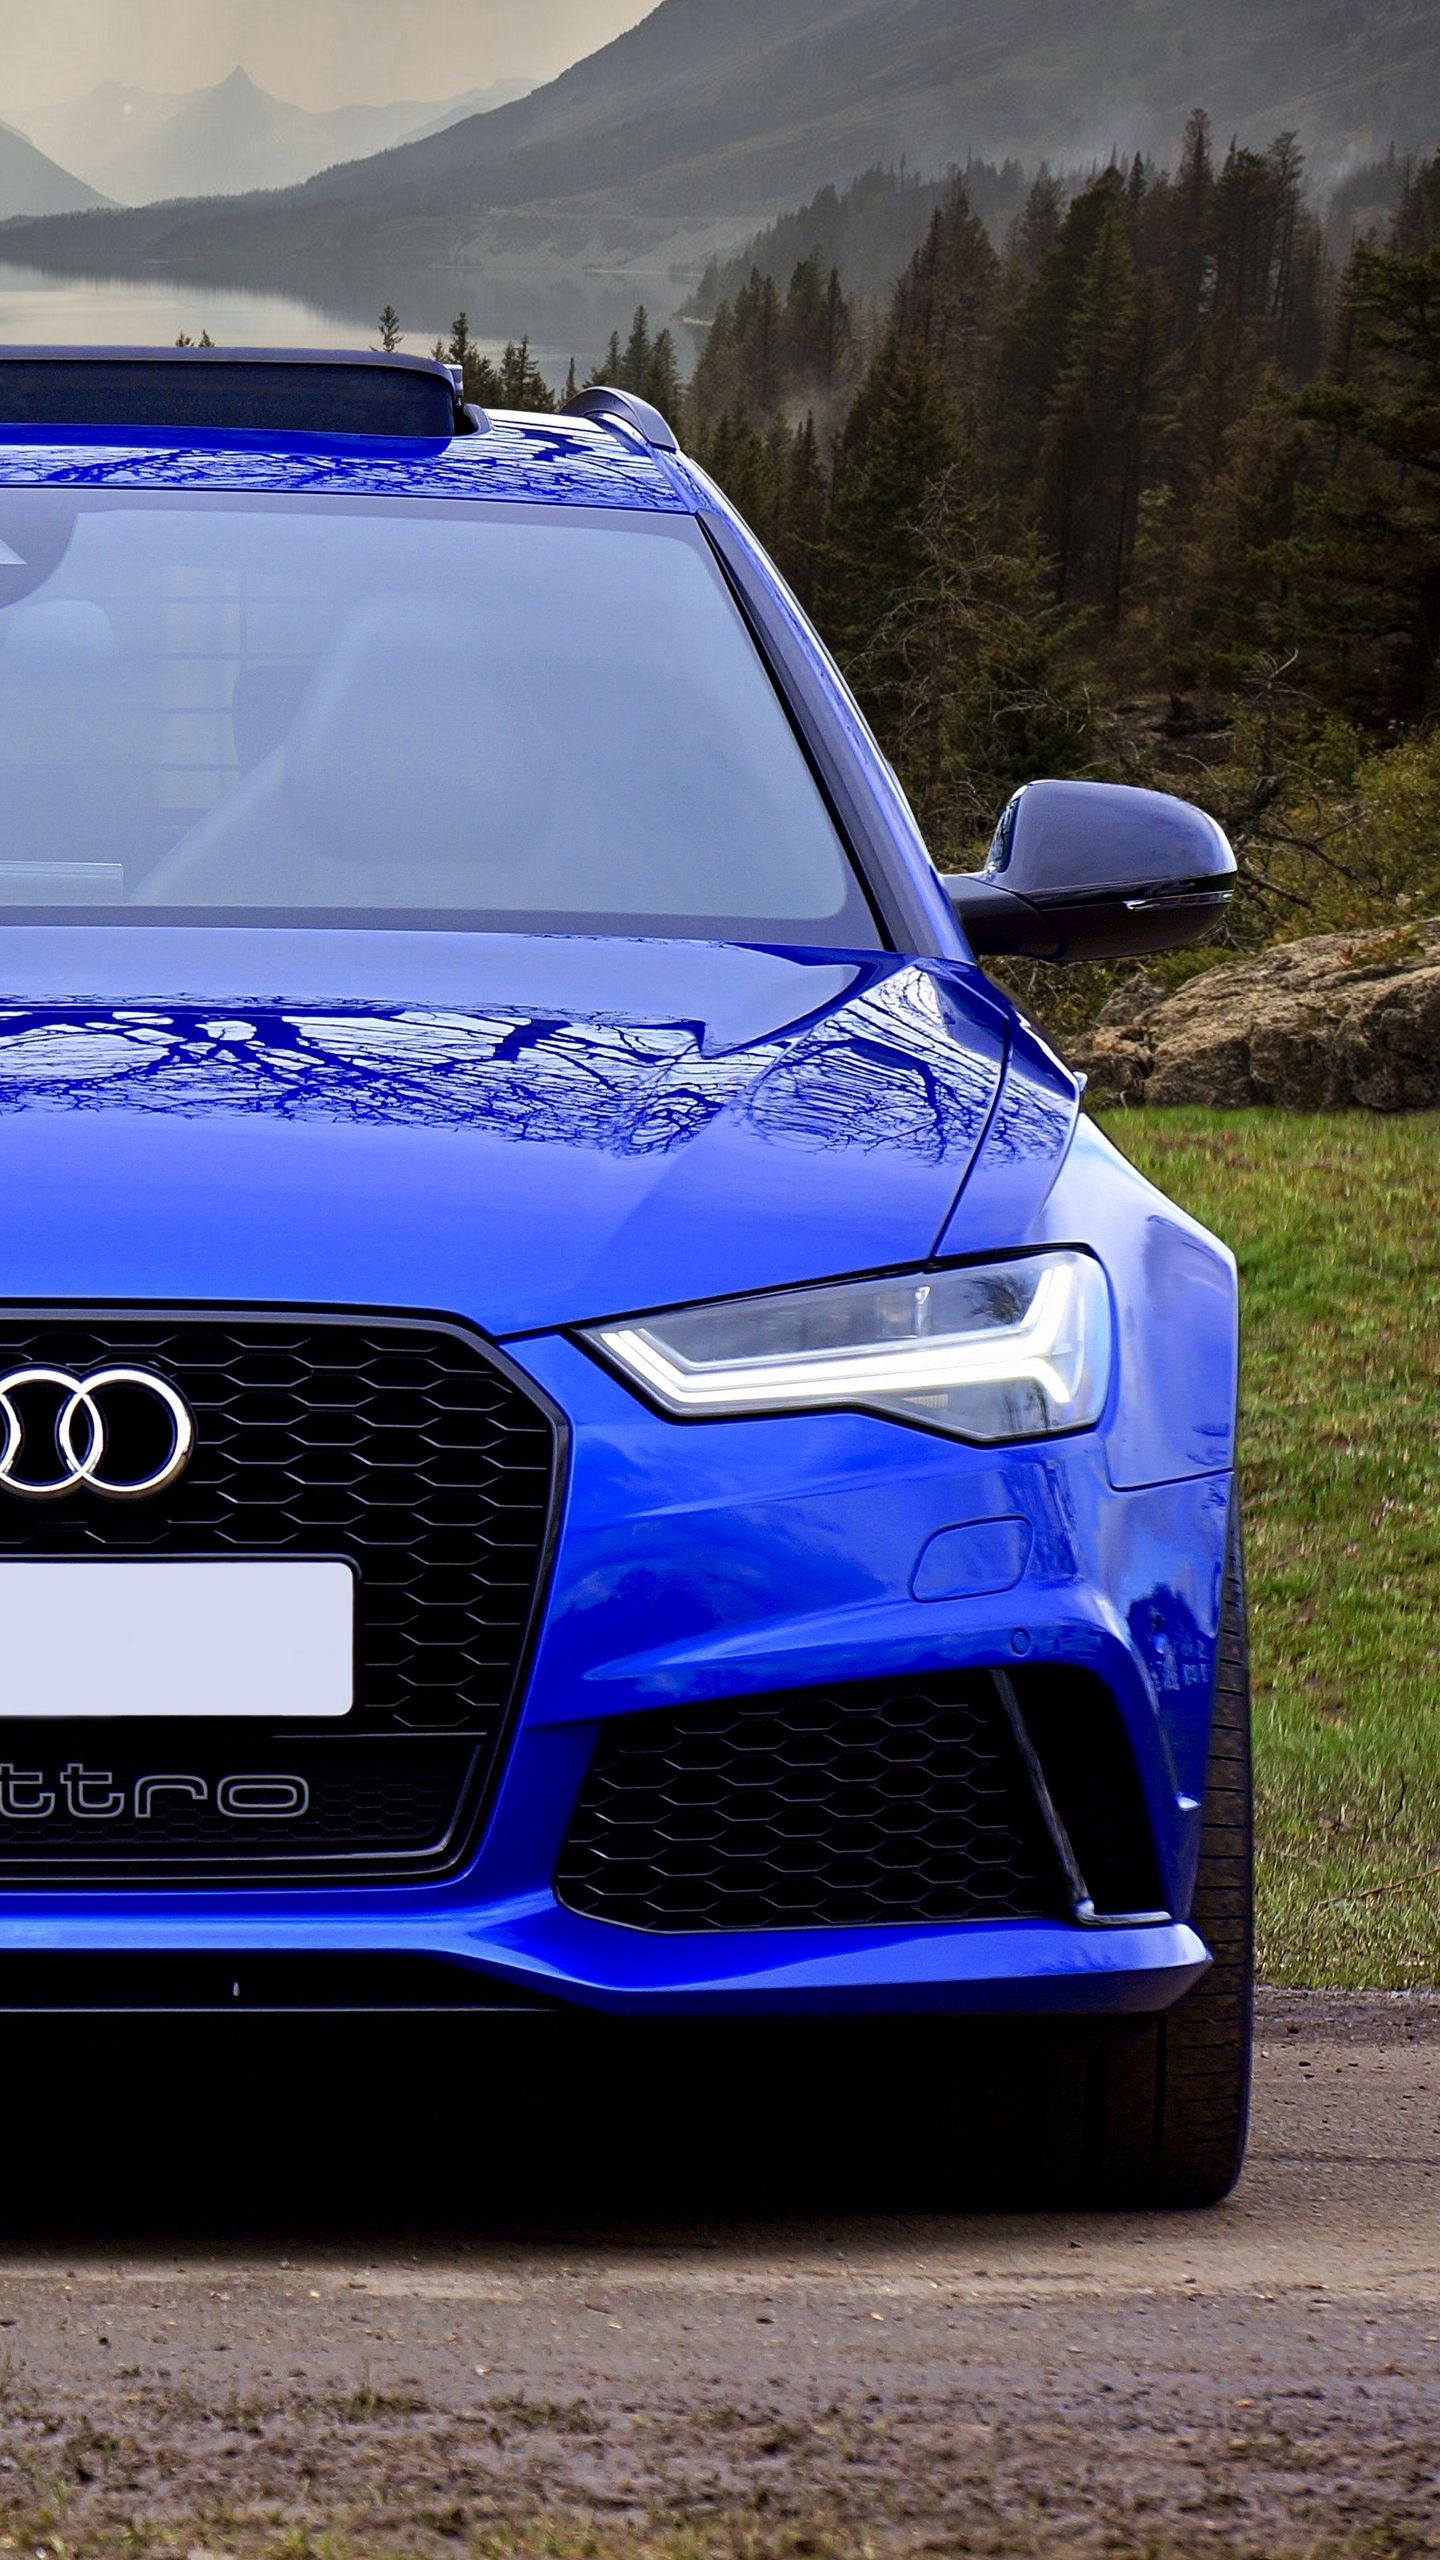 Download wallpaper 1440x2560 audi rs6, audi, car, blue, front view qhd  samsung galaxy s6, s7, edge, note, lg g4 hd background